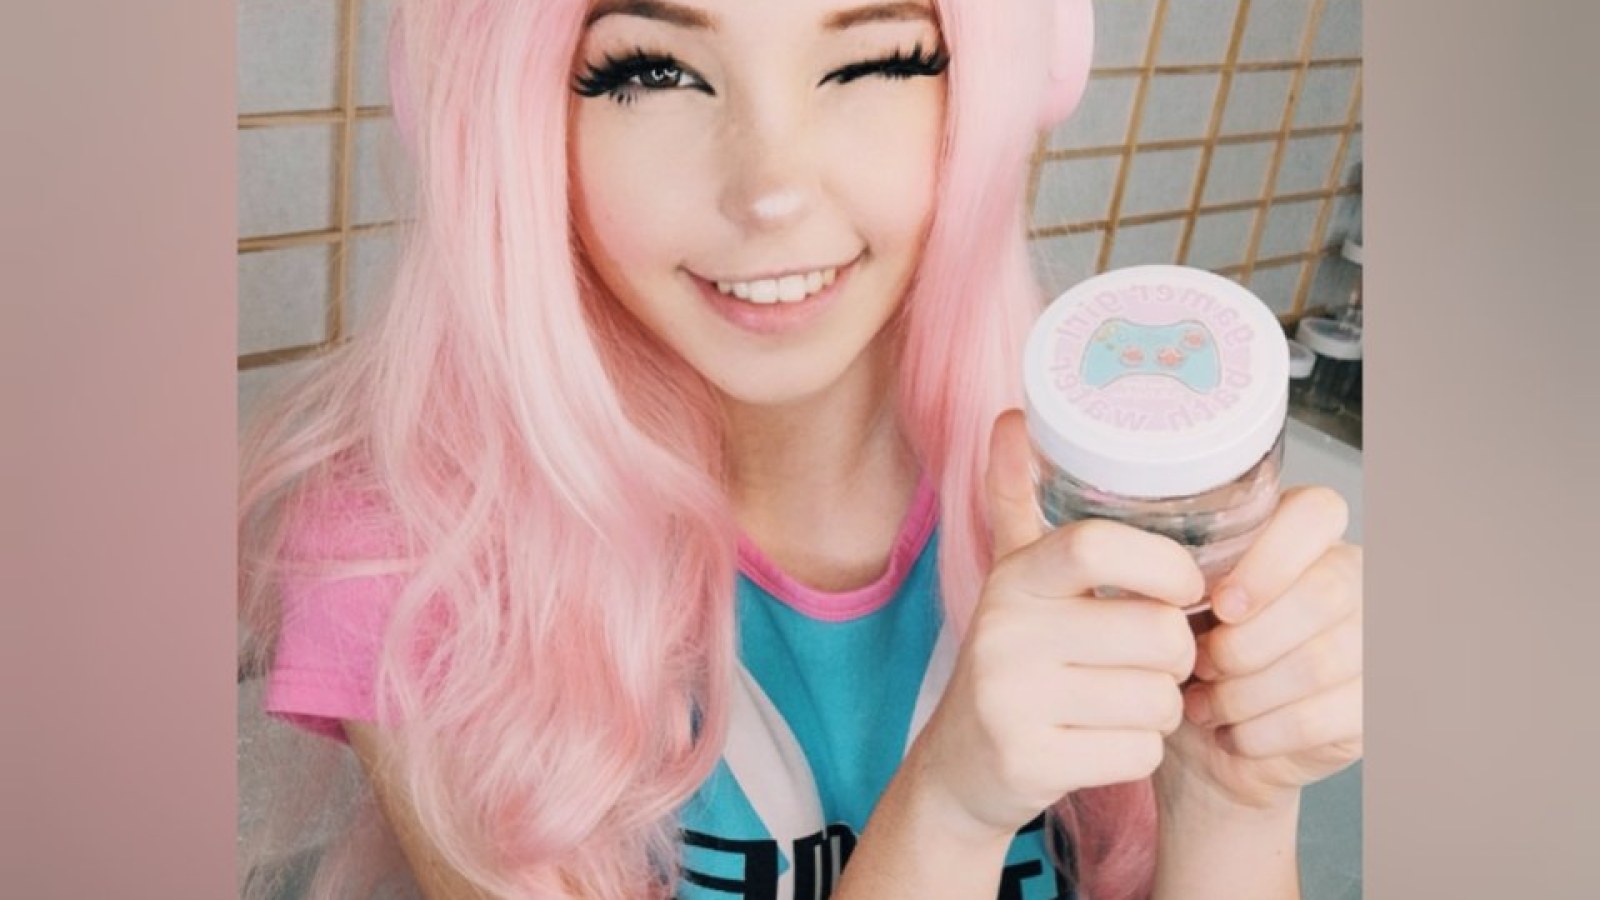 Belle Delphine Controversy: No Dna Bath Water And Herpes Rumor Debunked